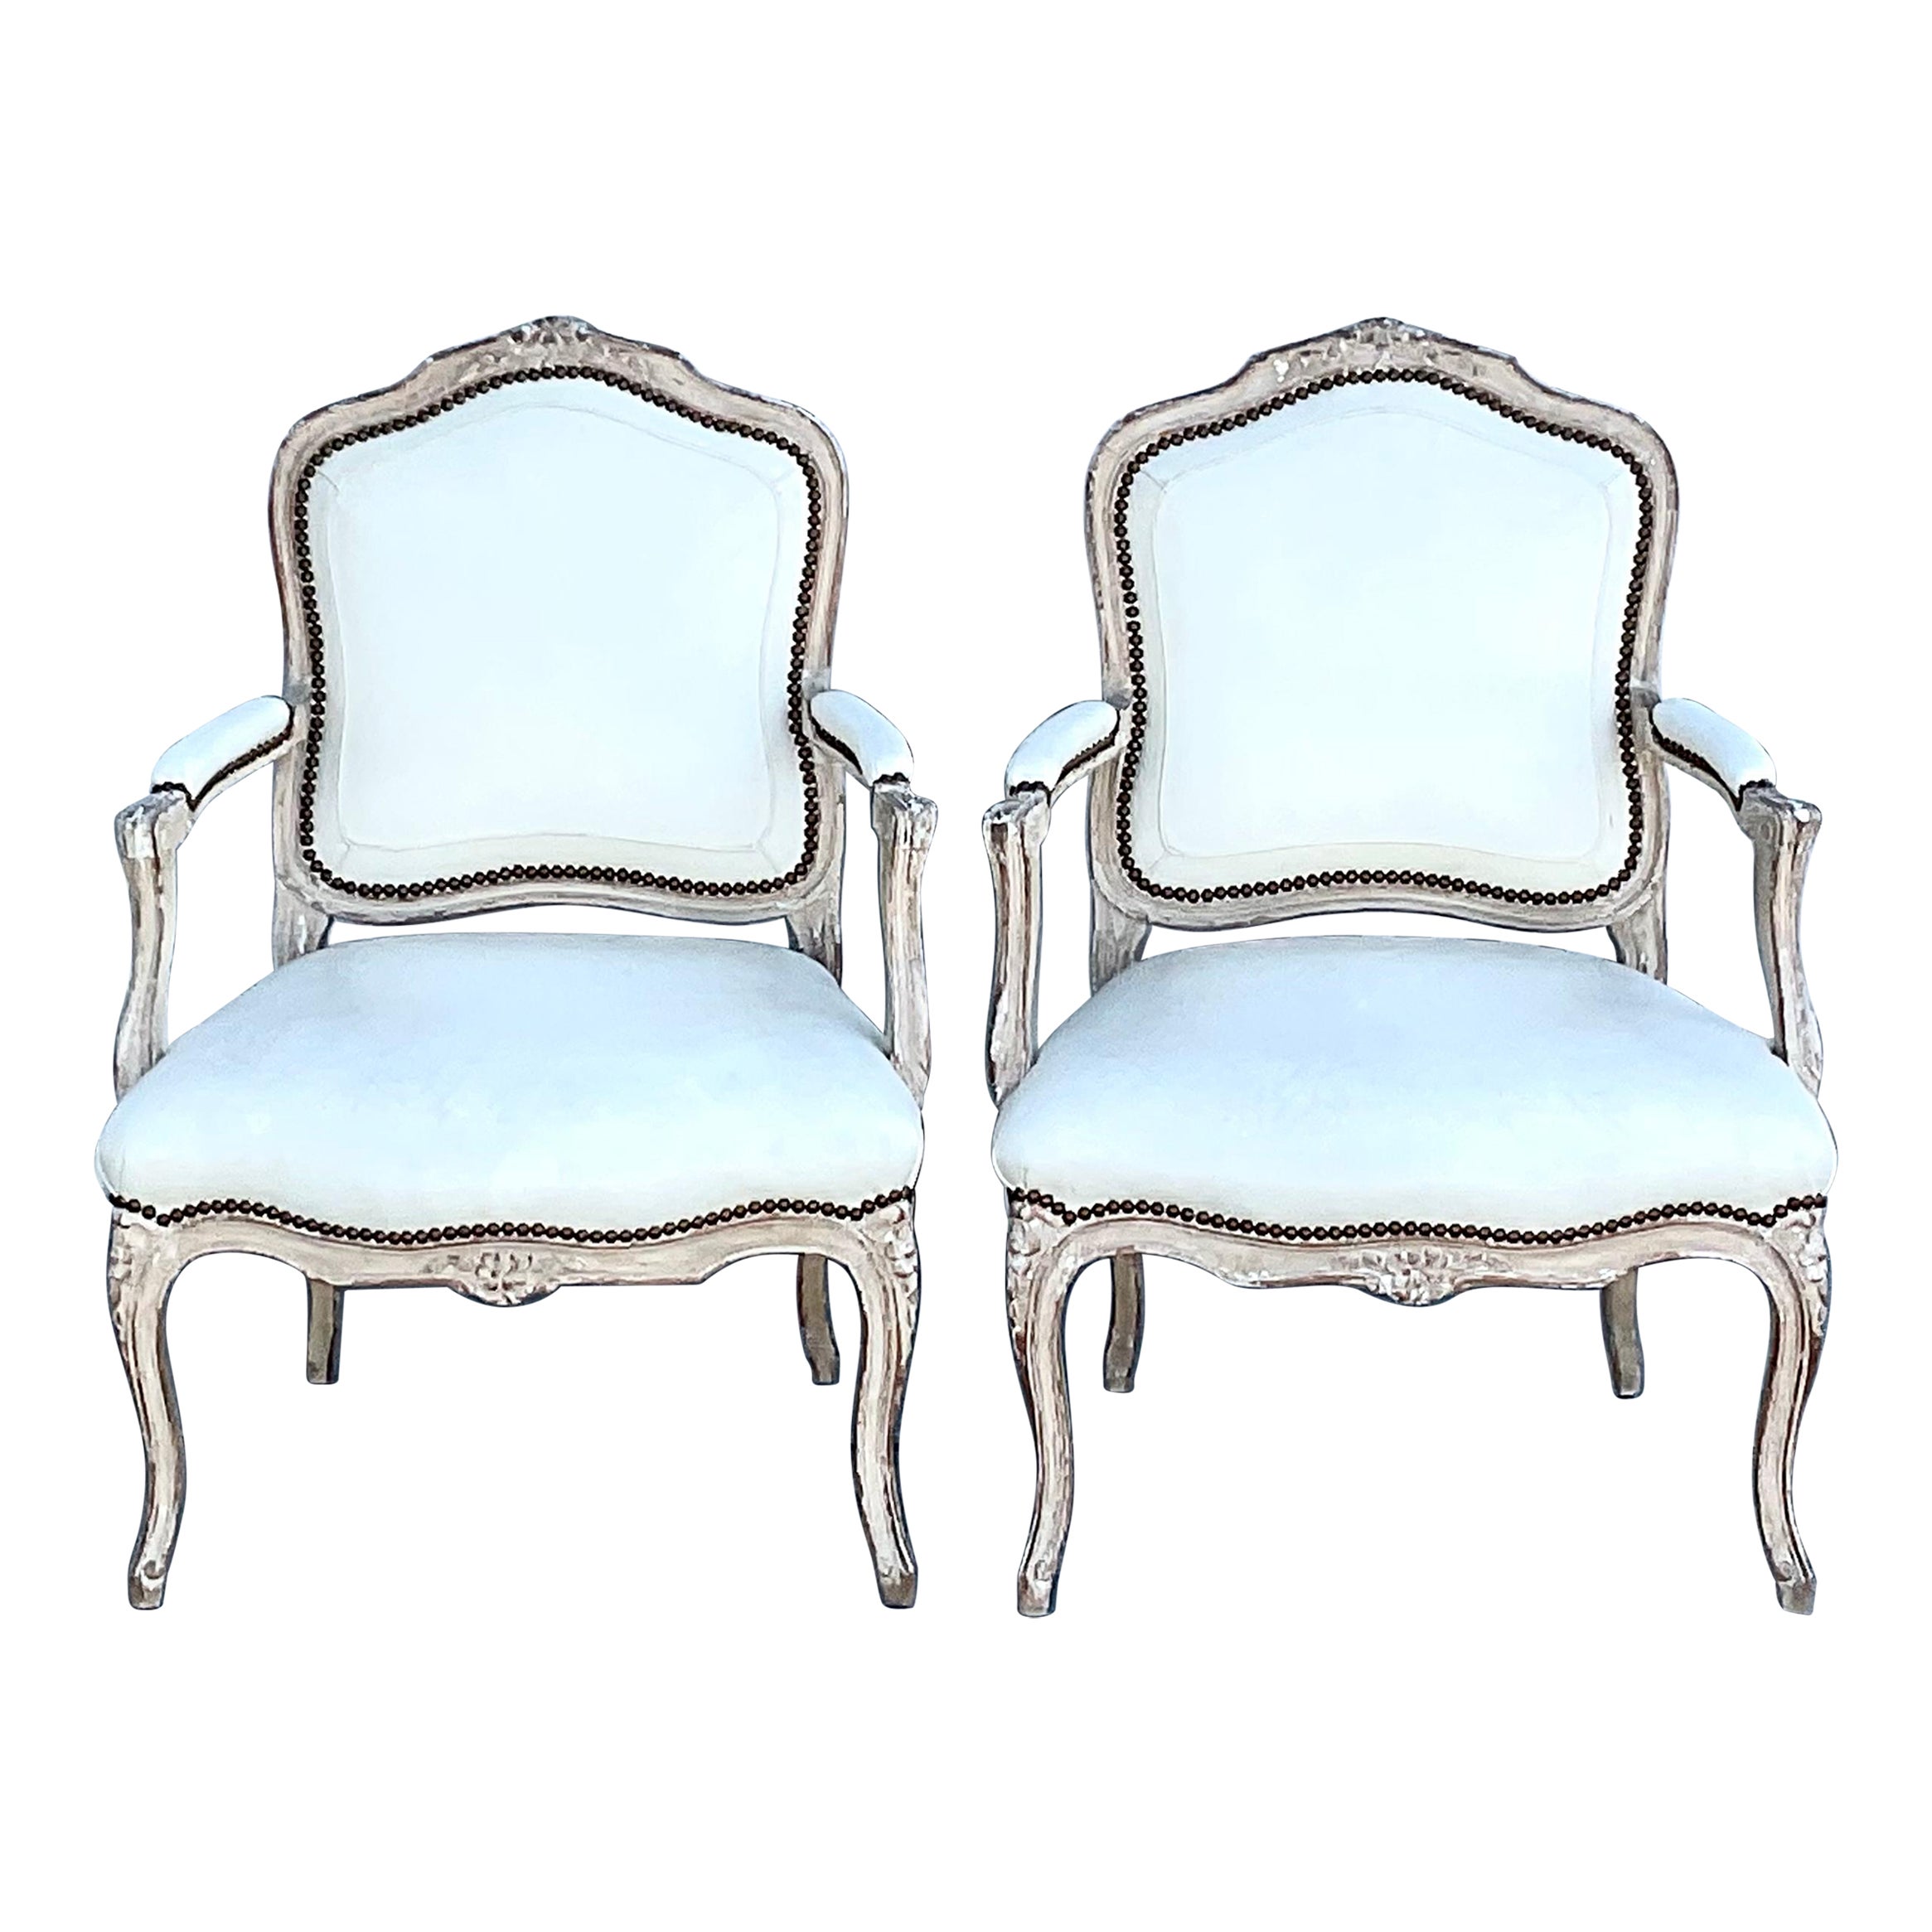 Vintage Regency Seamed Leather Bergere Chairs, a Pair